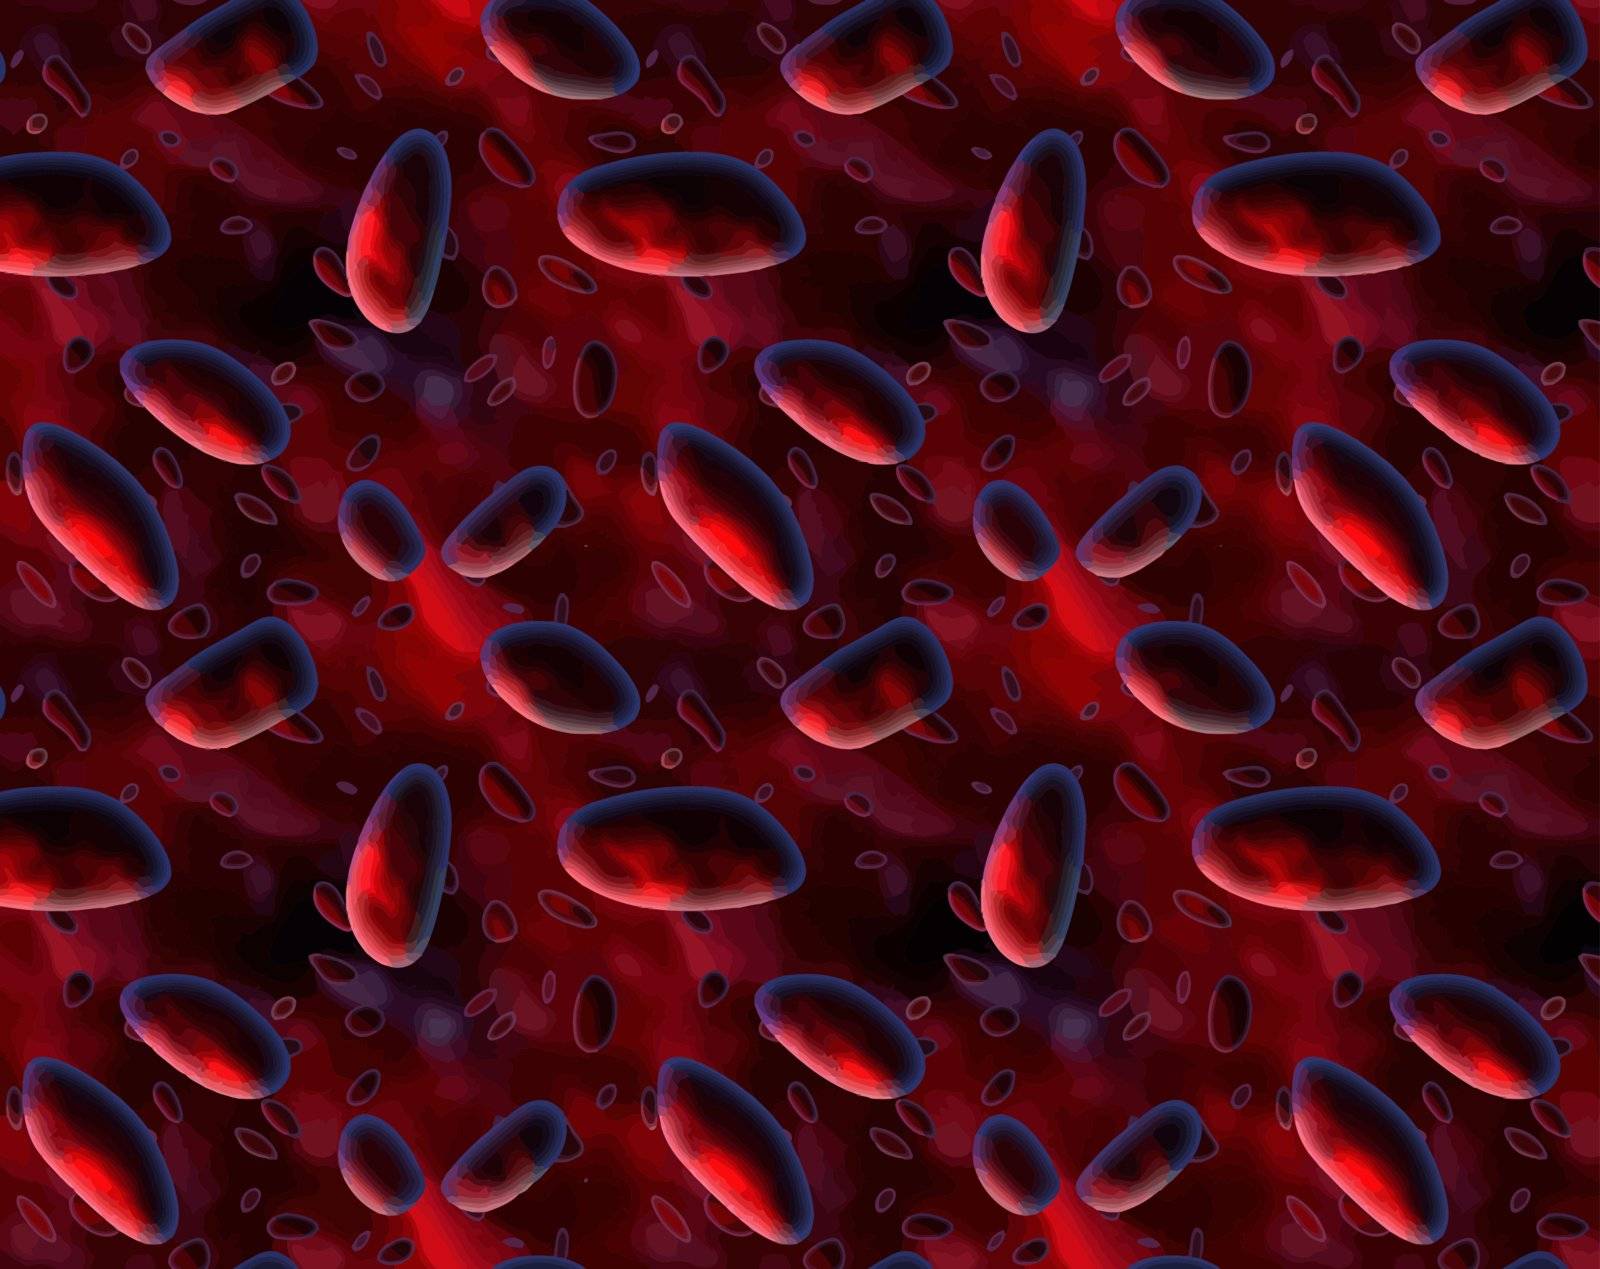 large image of blood cells floating around in an artery